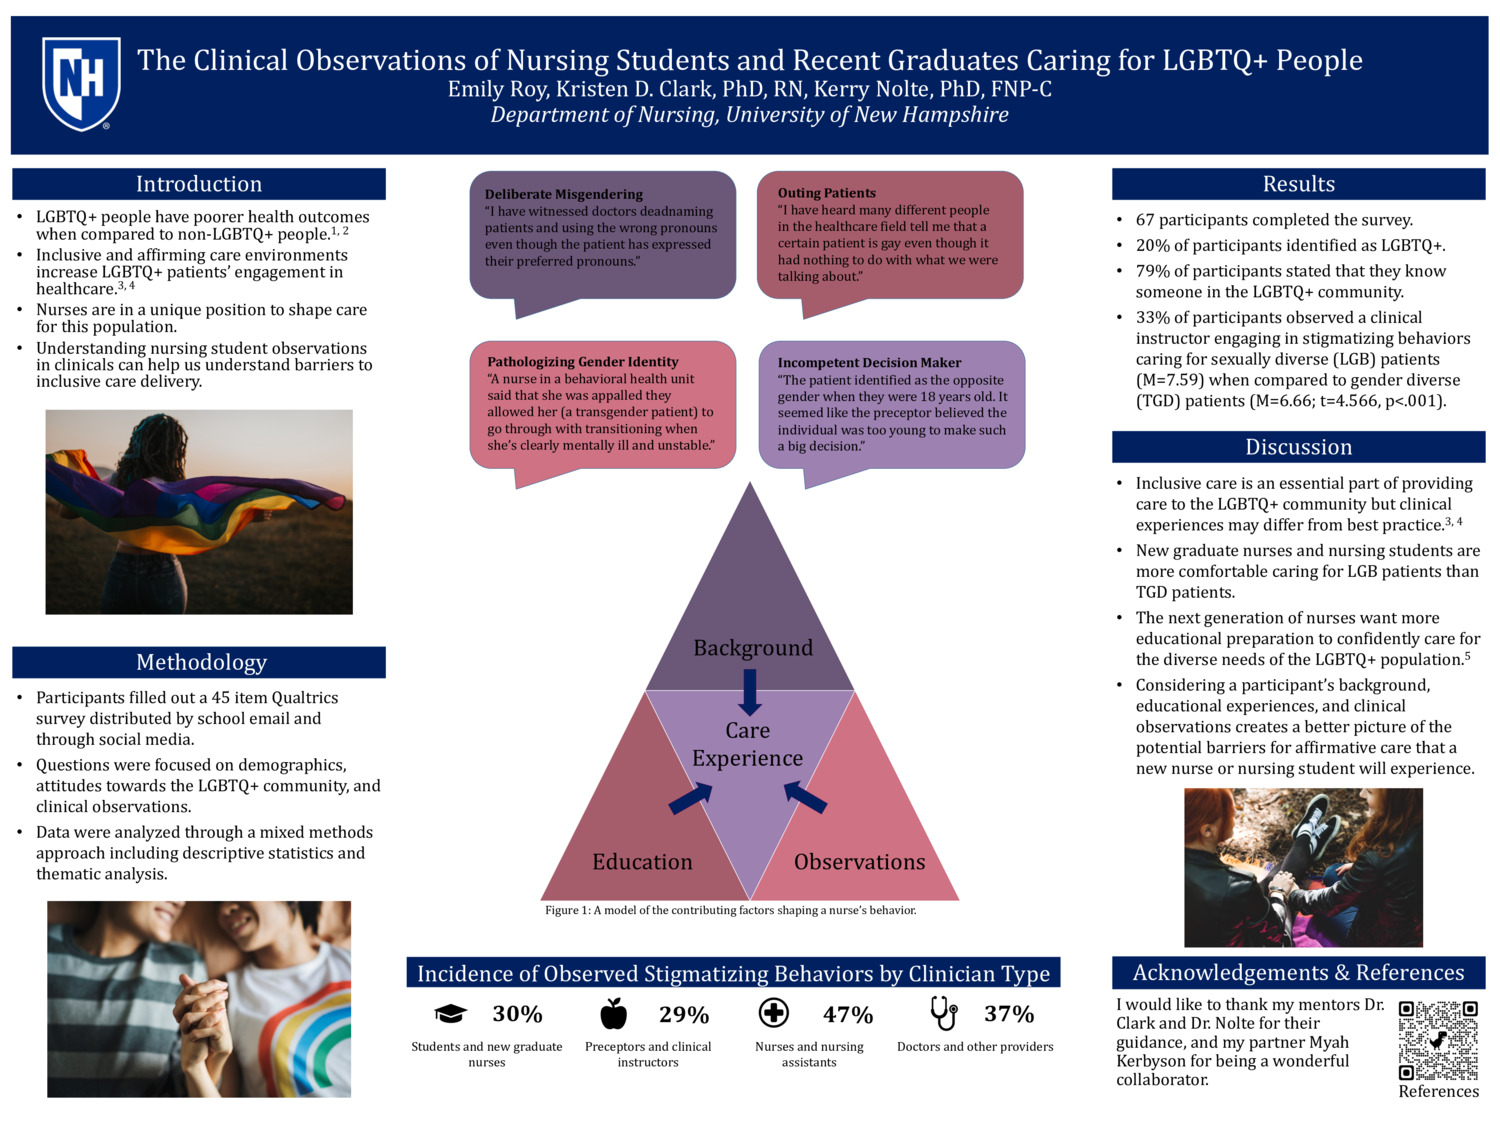 The Clinical Observations Of Nursing Students And Recent Graduates Caring For Lgbtq+ People by eer1028